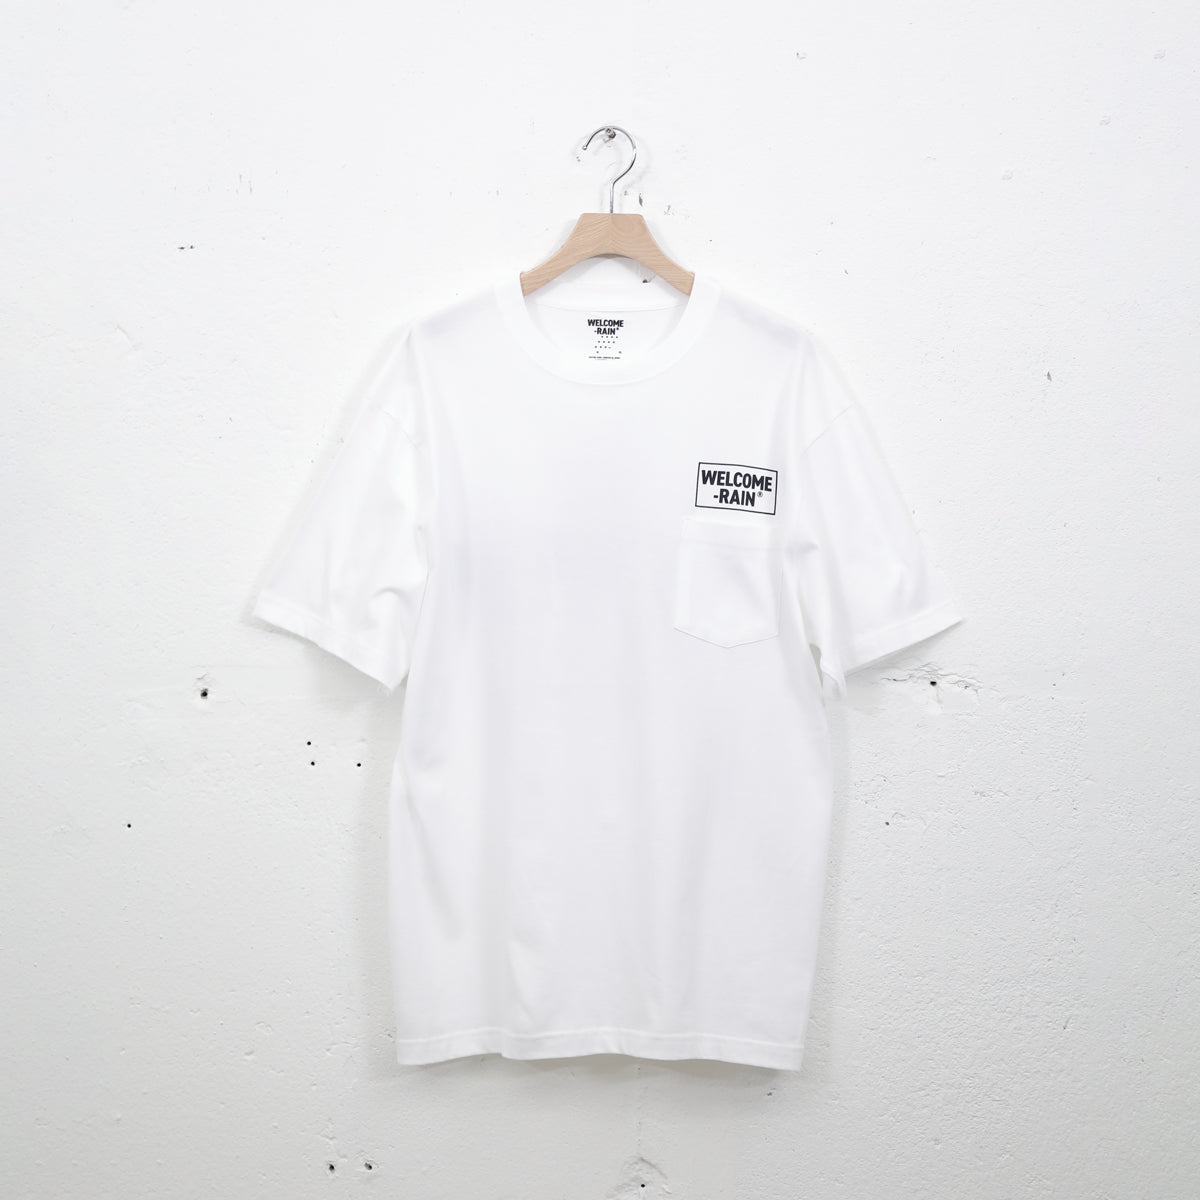 Nr.Barker back with Rain Drops [WR6-TS01] White